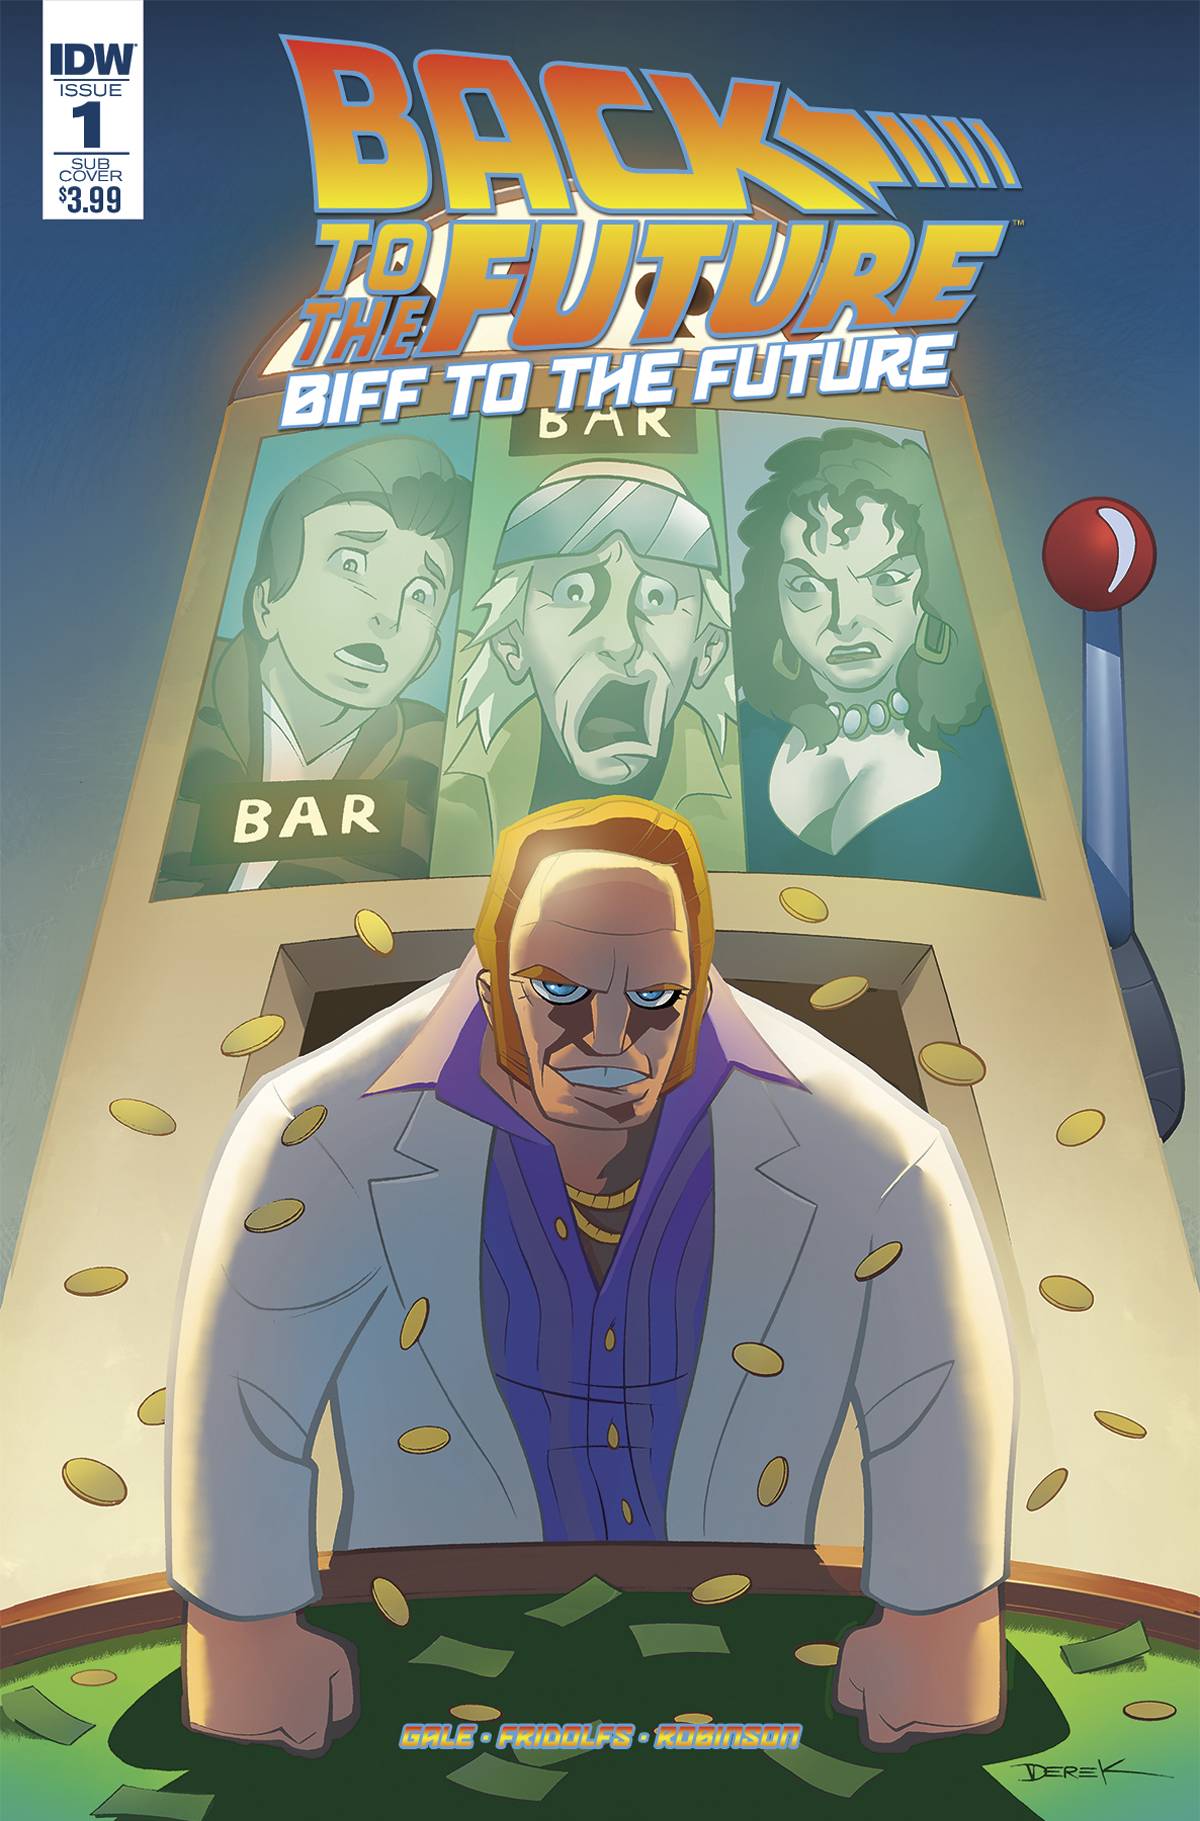 Back To the Future Biff To the Future #1 Sub Variant